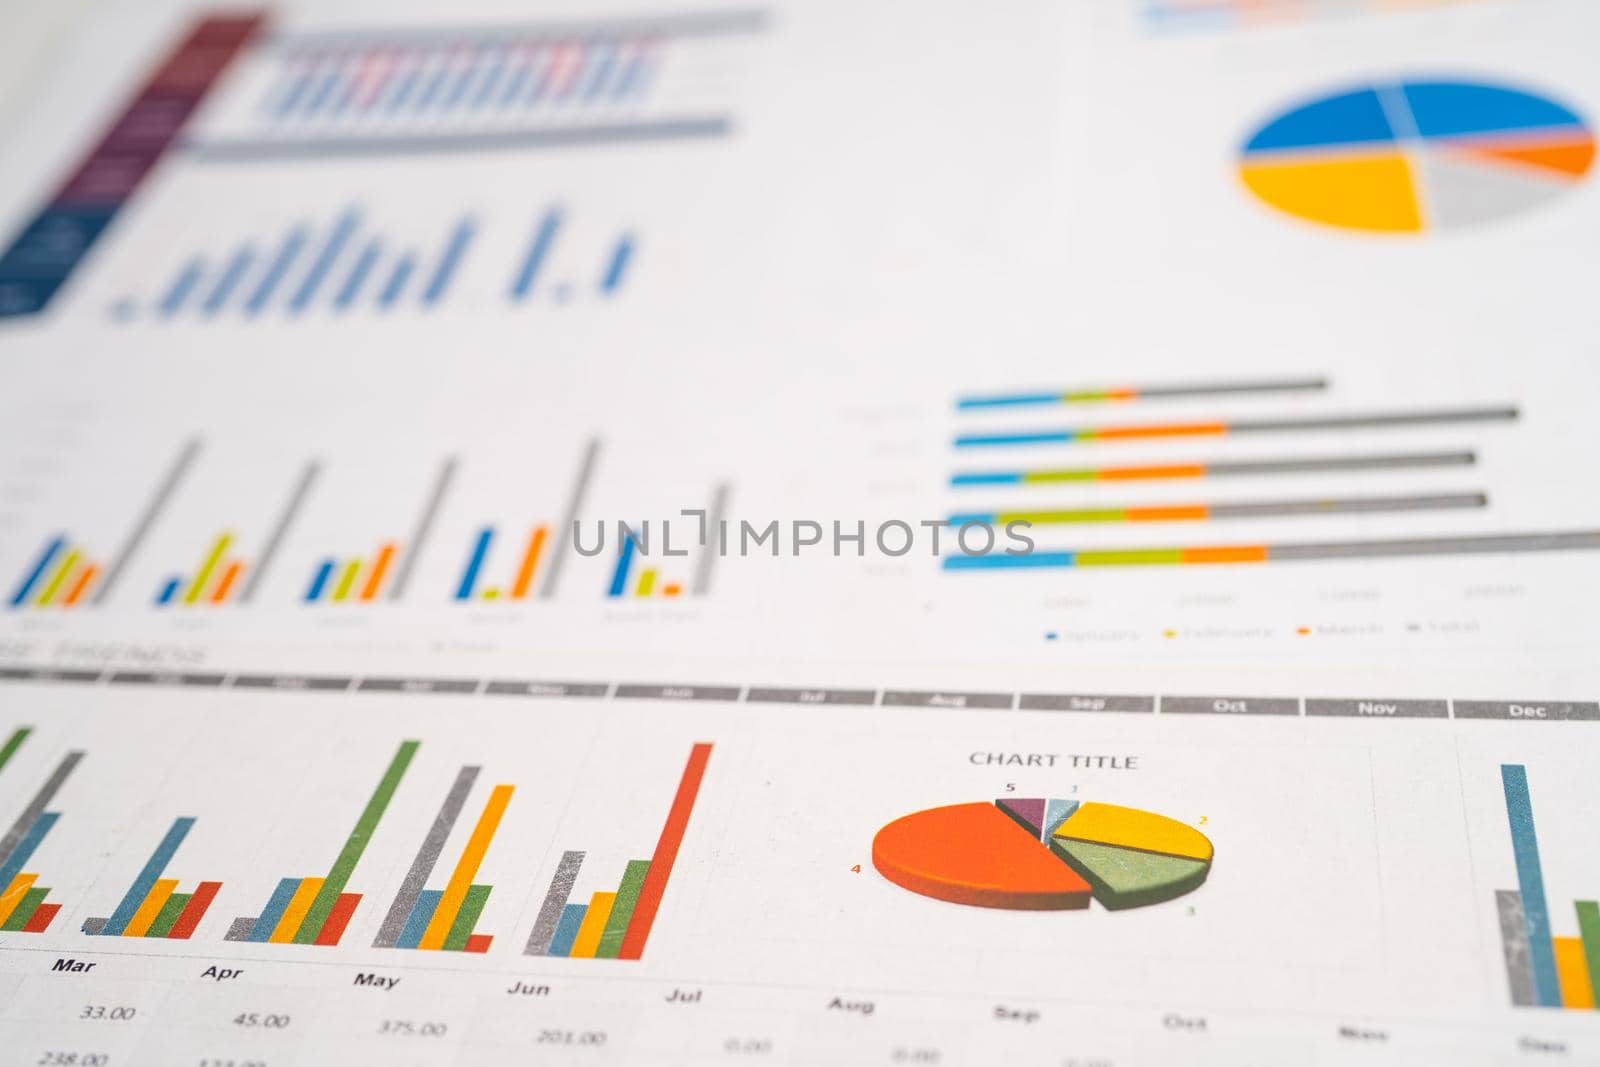 Charts Graphs paper. Financial development, Banking Account, Statistics, Investment Analytic research data economy, Stock exchange Business office company meeting concept.